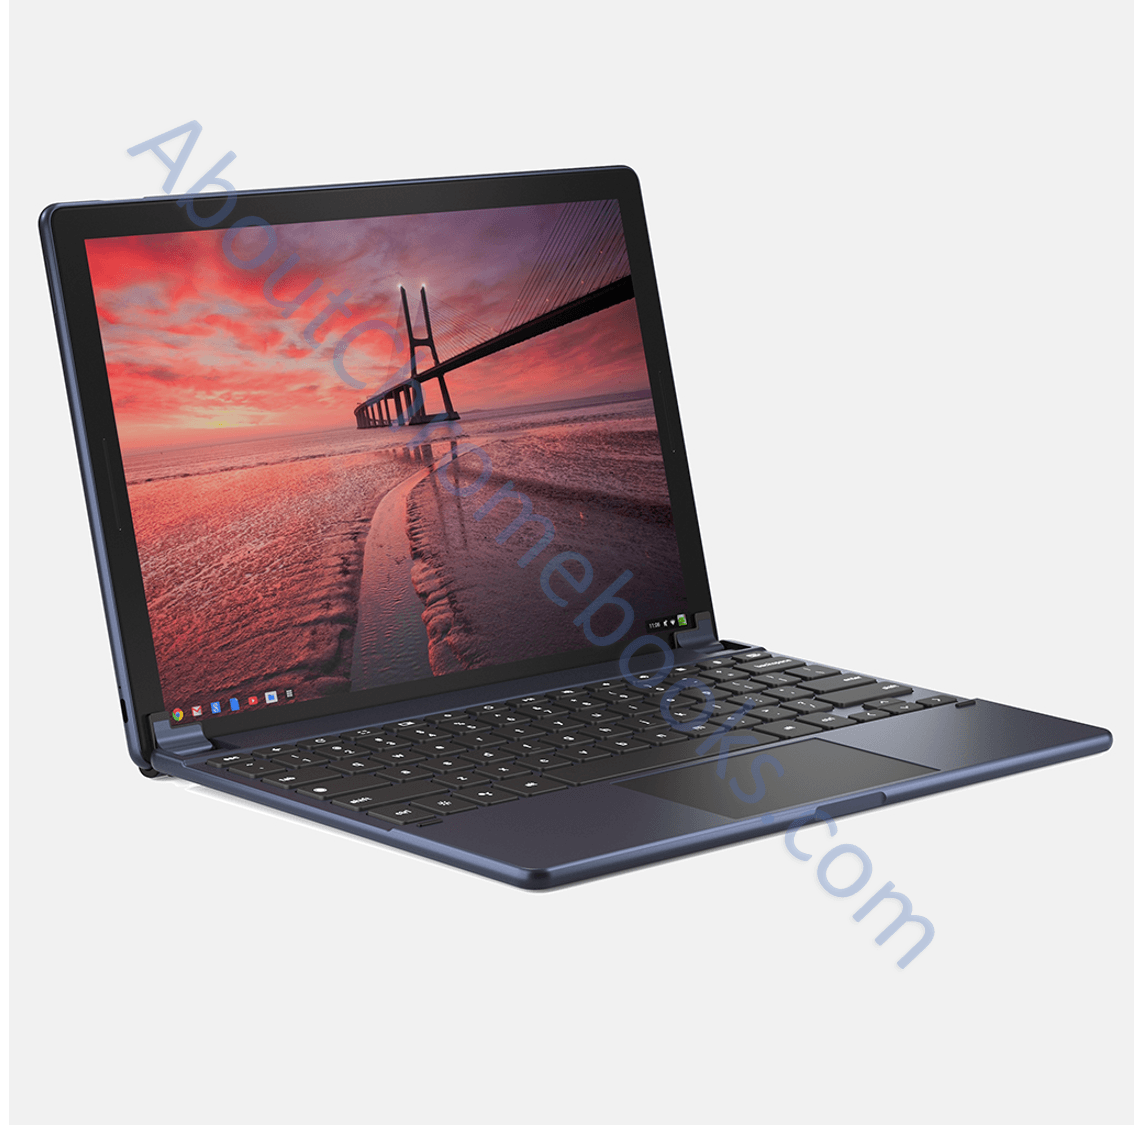 Google Pixel Slate tipped to have Core i7-8500Y and 16 GB option, running Android 9